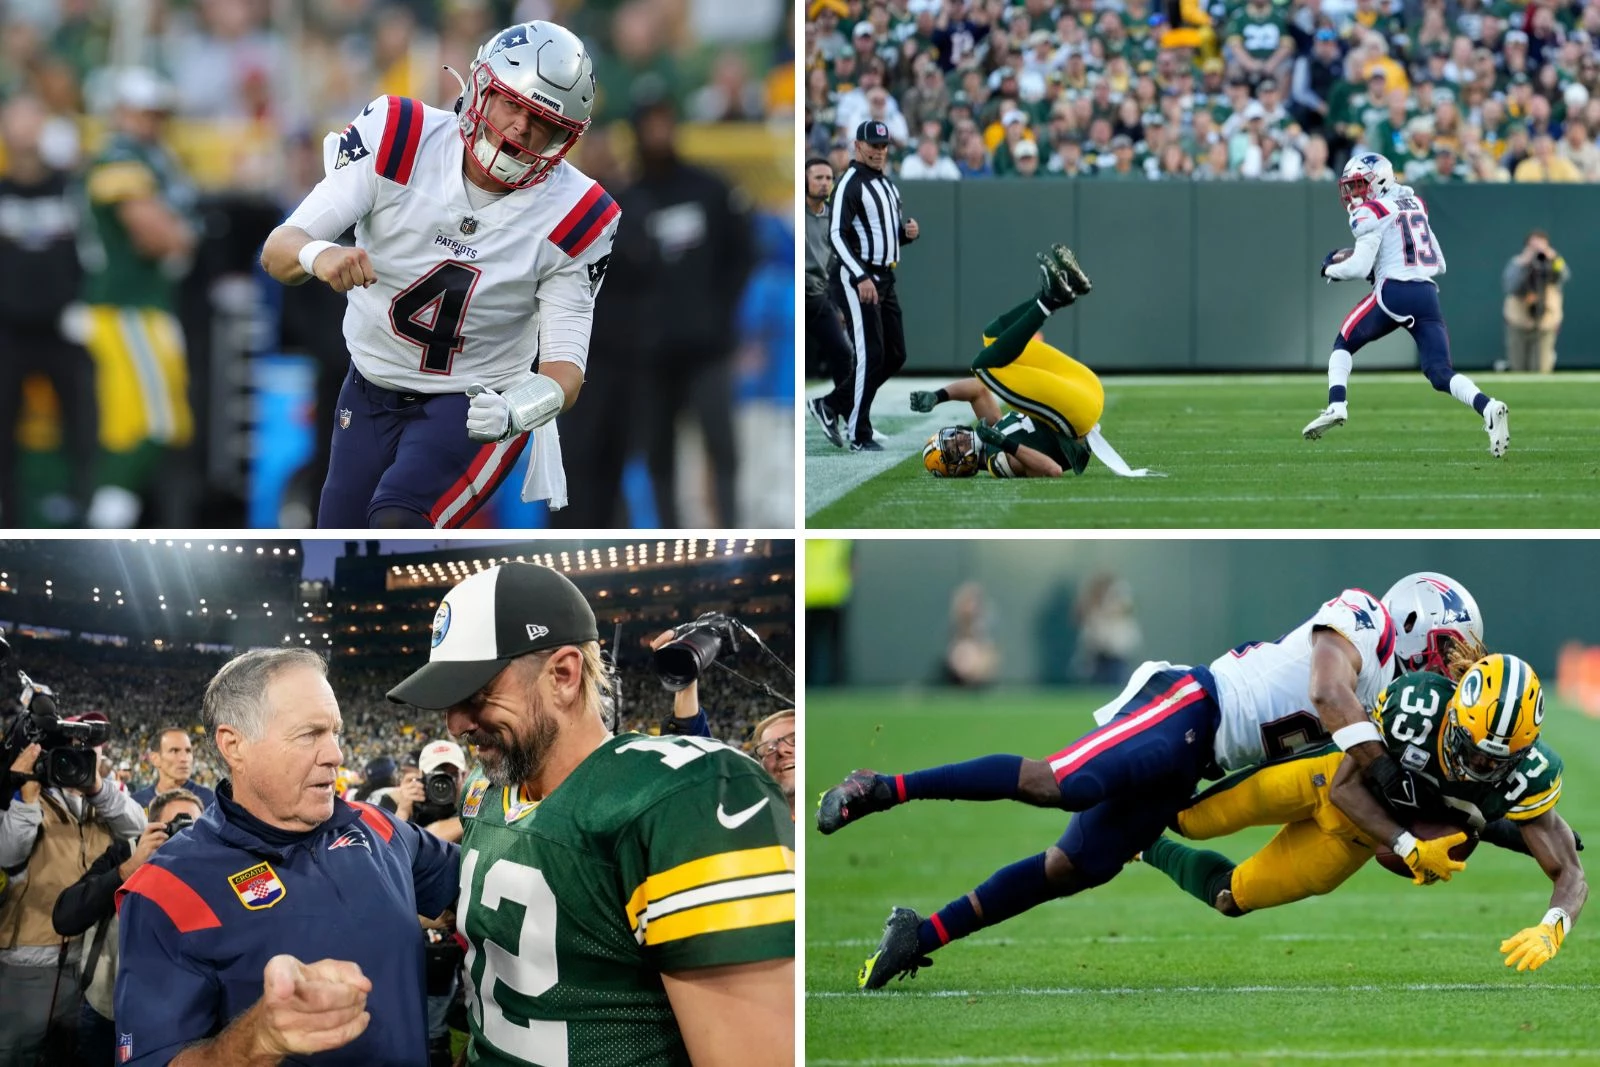 Look: 50 Photos From the Patriots' Overtime Loss to the Packers